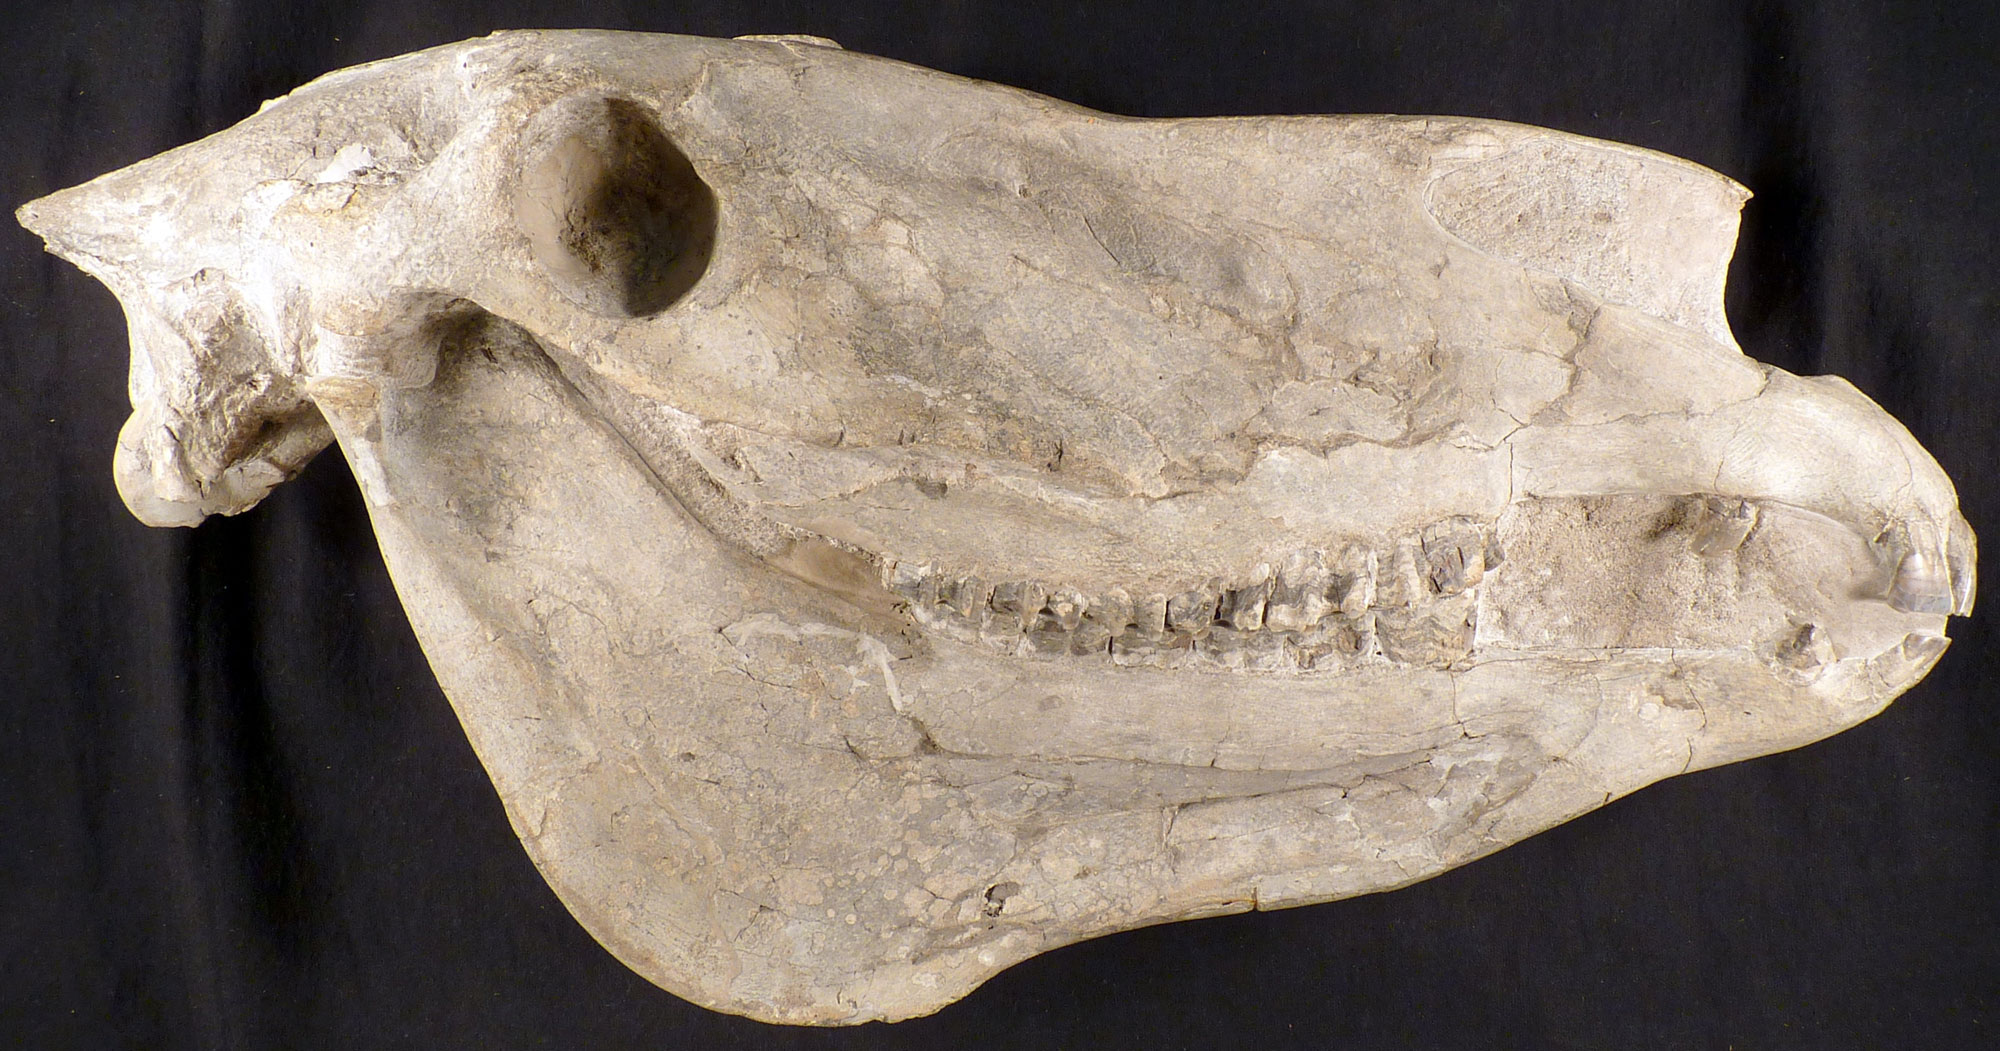 Photograph of the skull of a Hagerman horse shows from the side. 